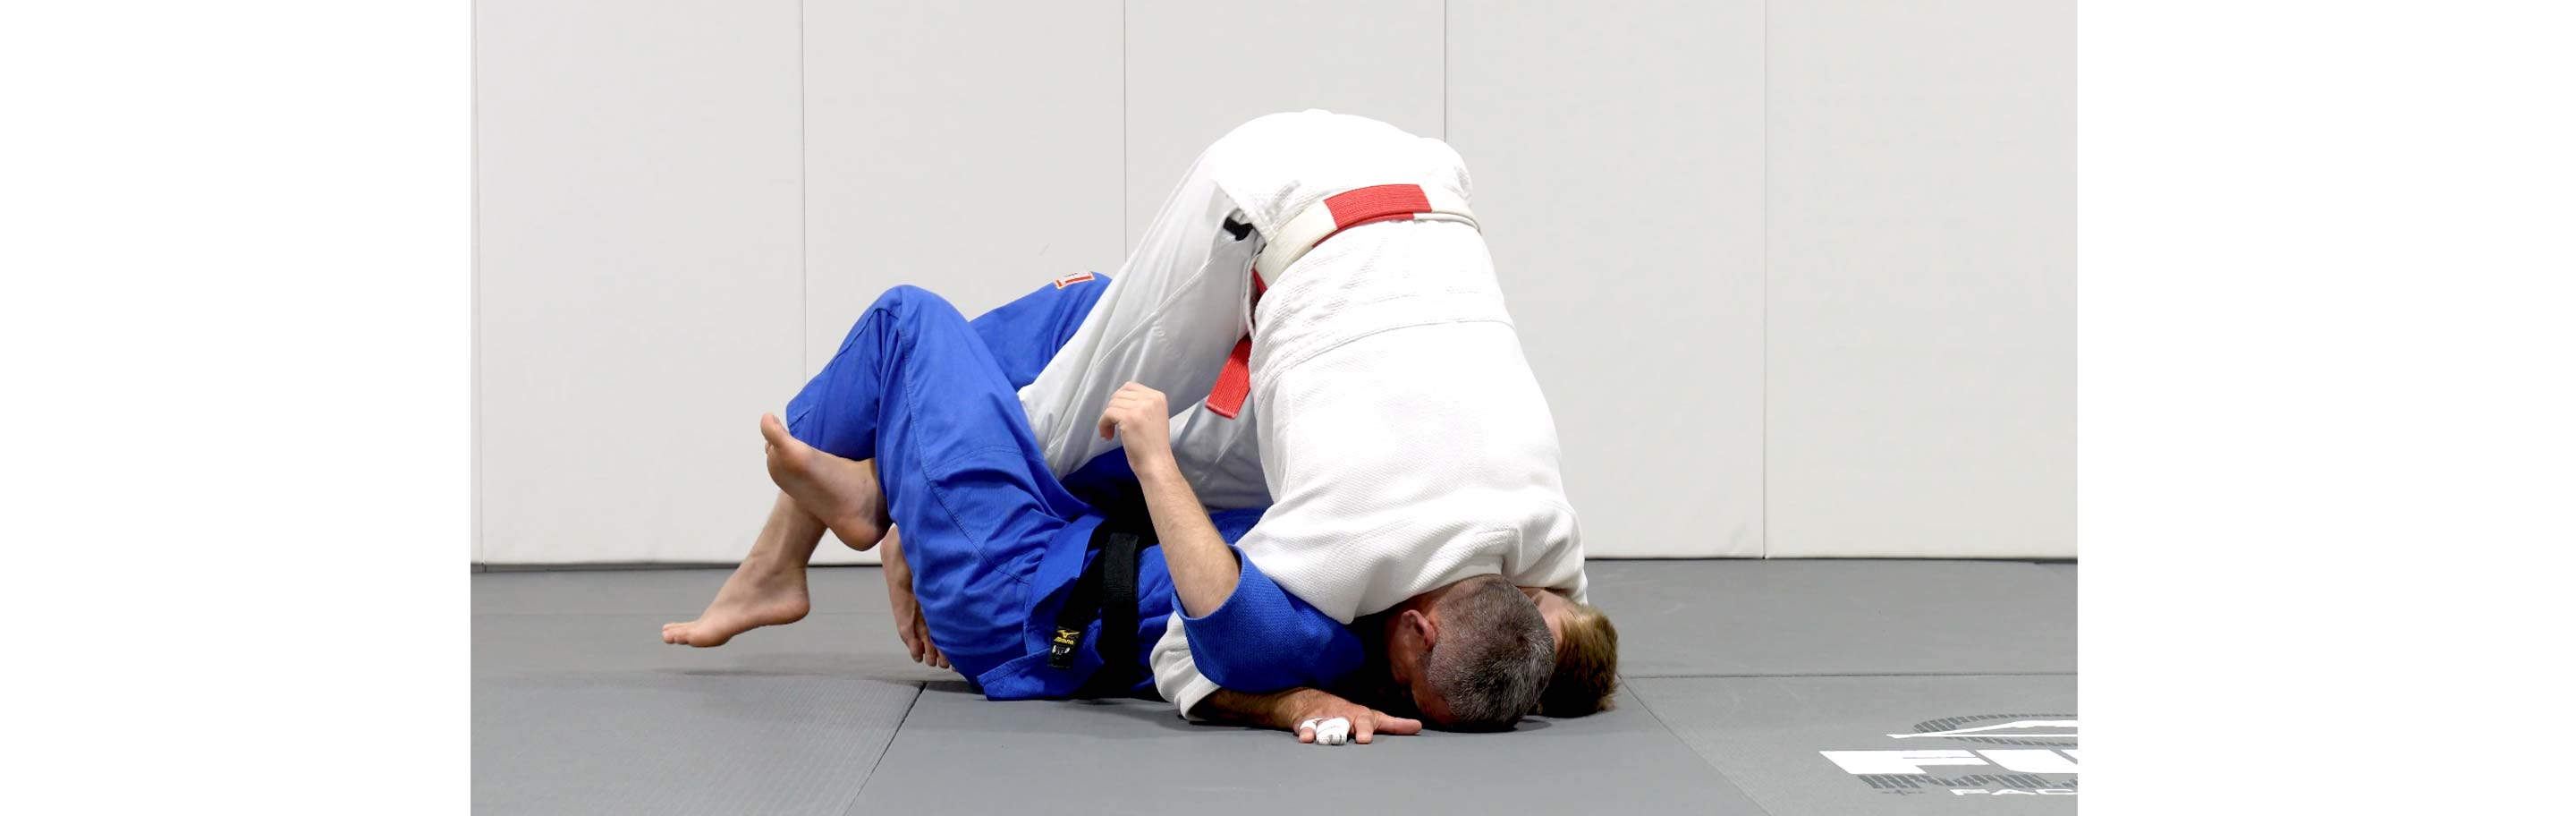 Jimmy Pedro - Learn How To Pin In Judo